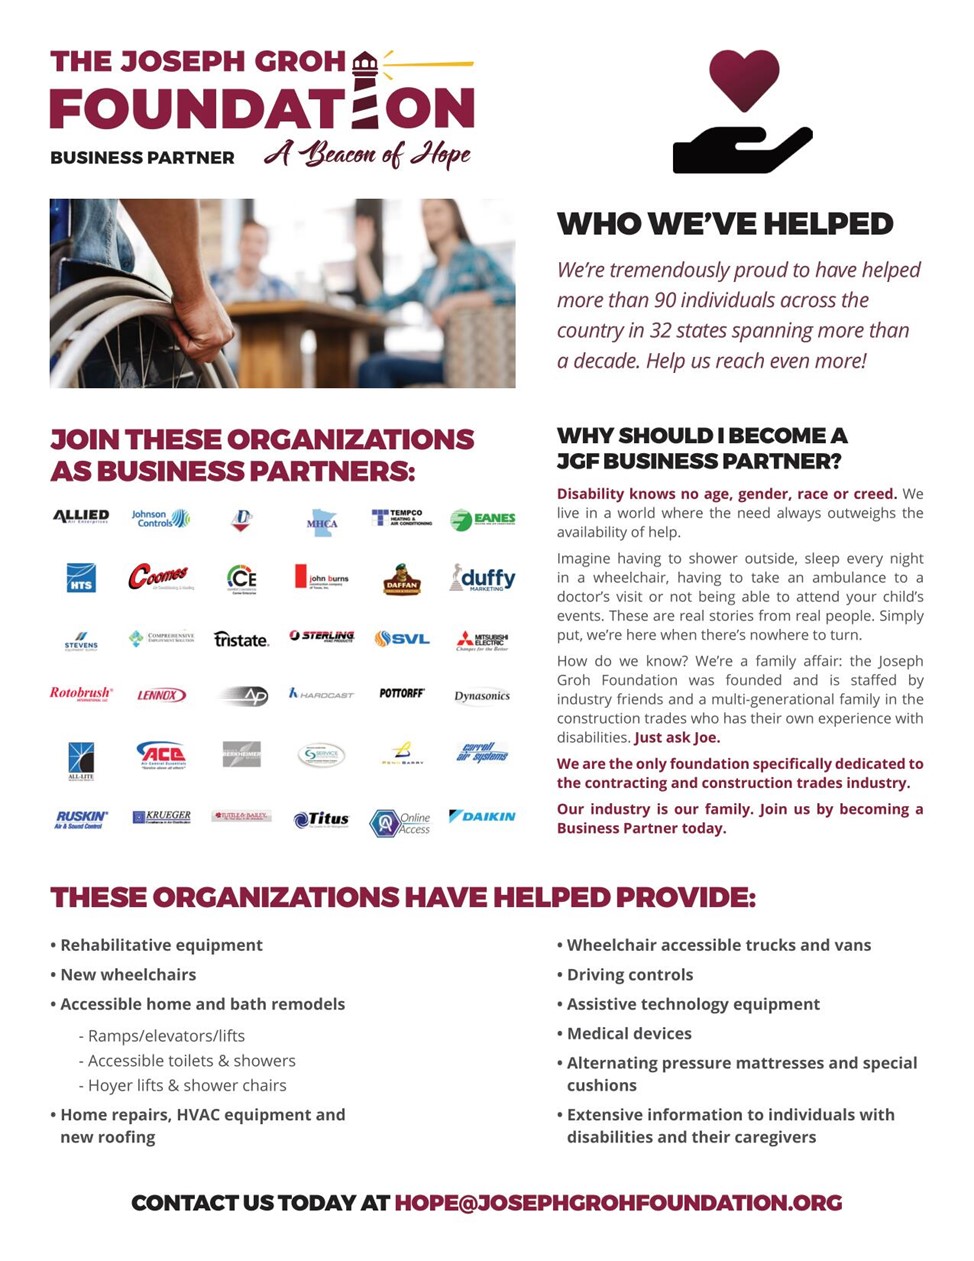 Please consider becoming a business partner!